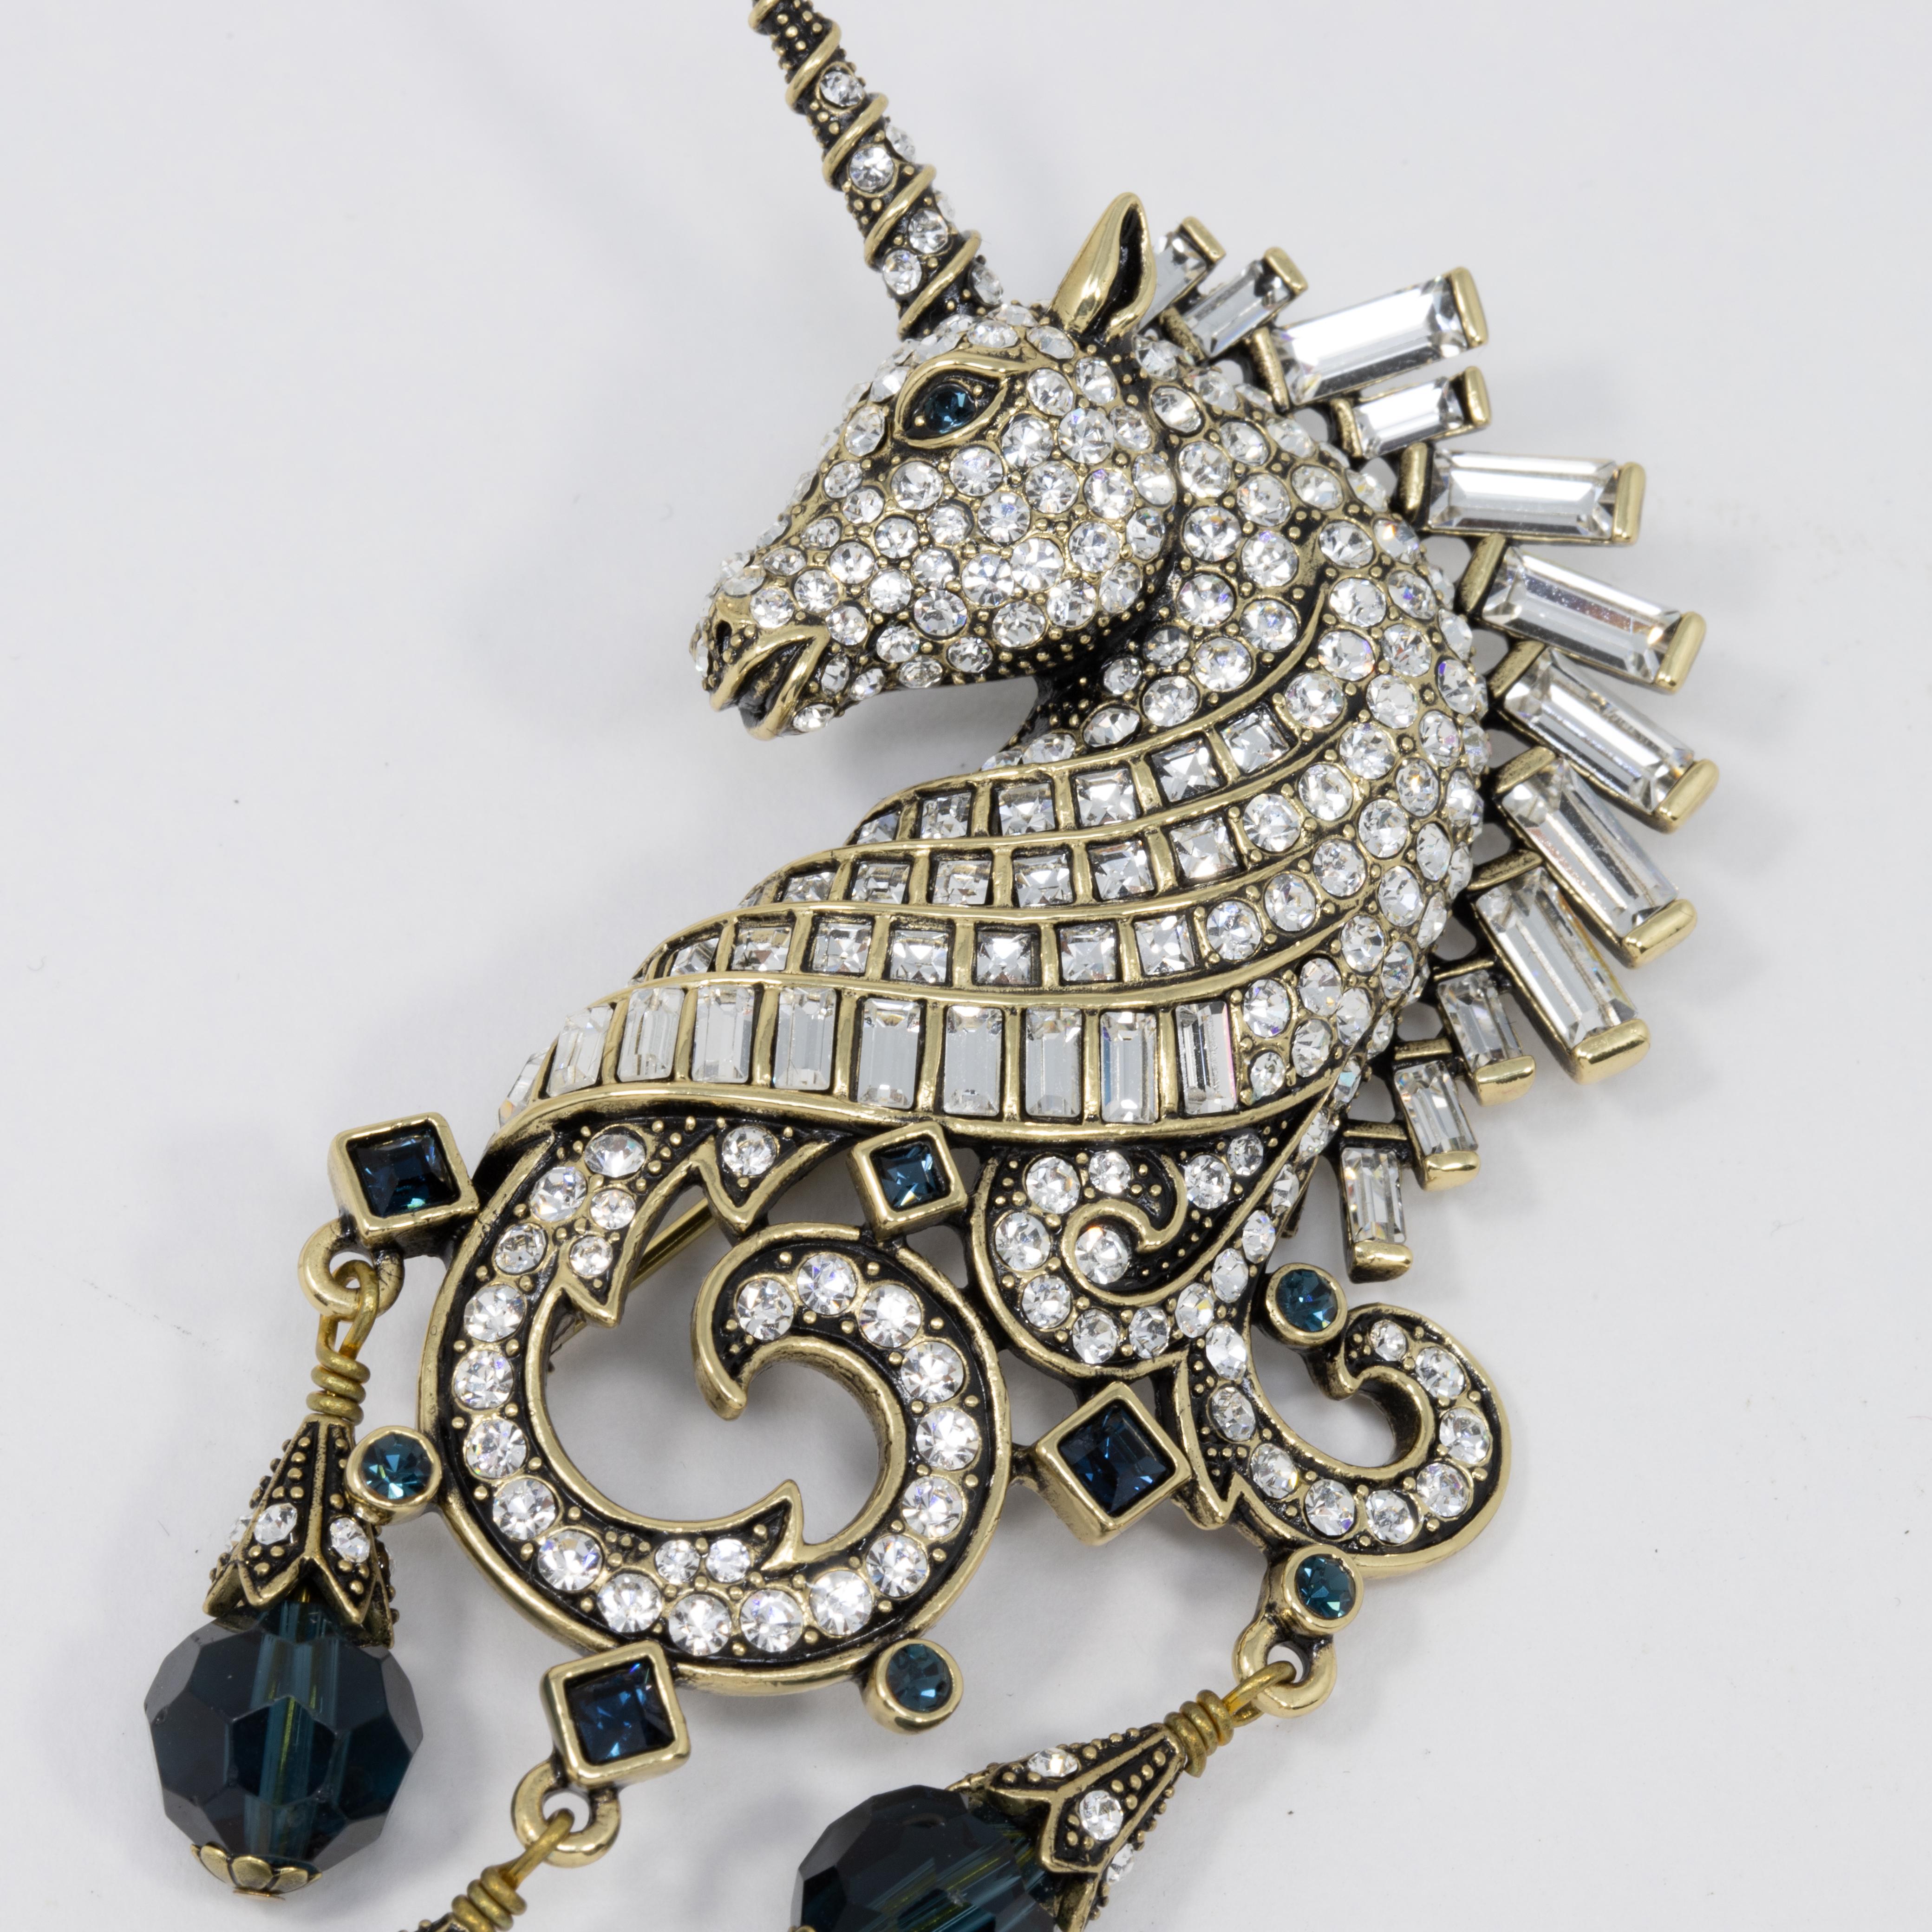 Heidi Daus ornate unicorn pin brooch. Features a unicorn head decorated with dazzling clear crystals, set in goldtone metal.

Hallmarks: Heidi Daus, China

